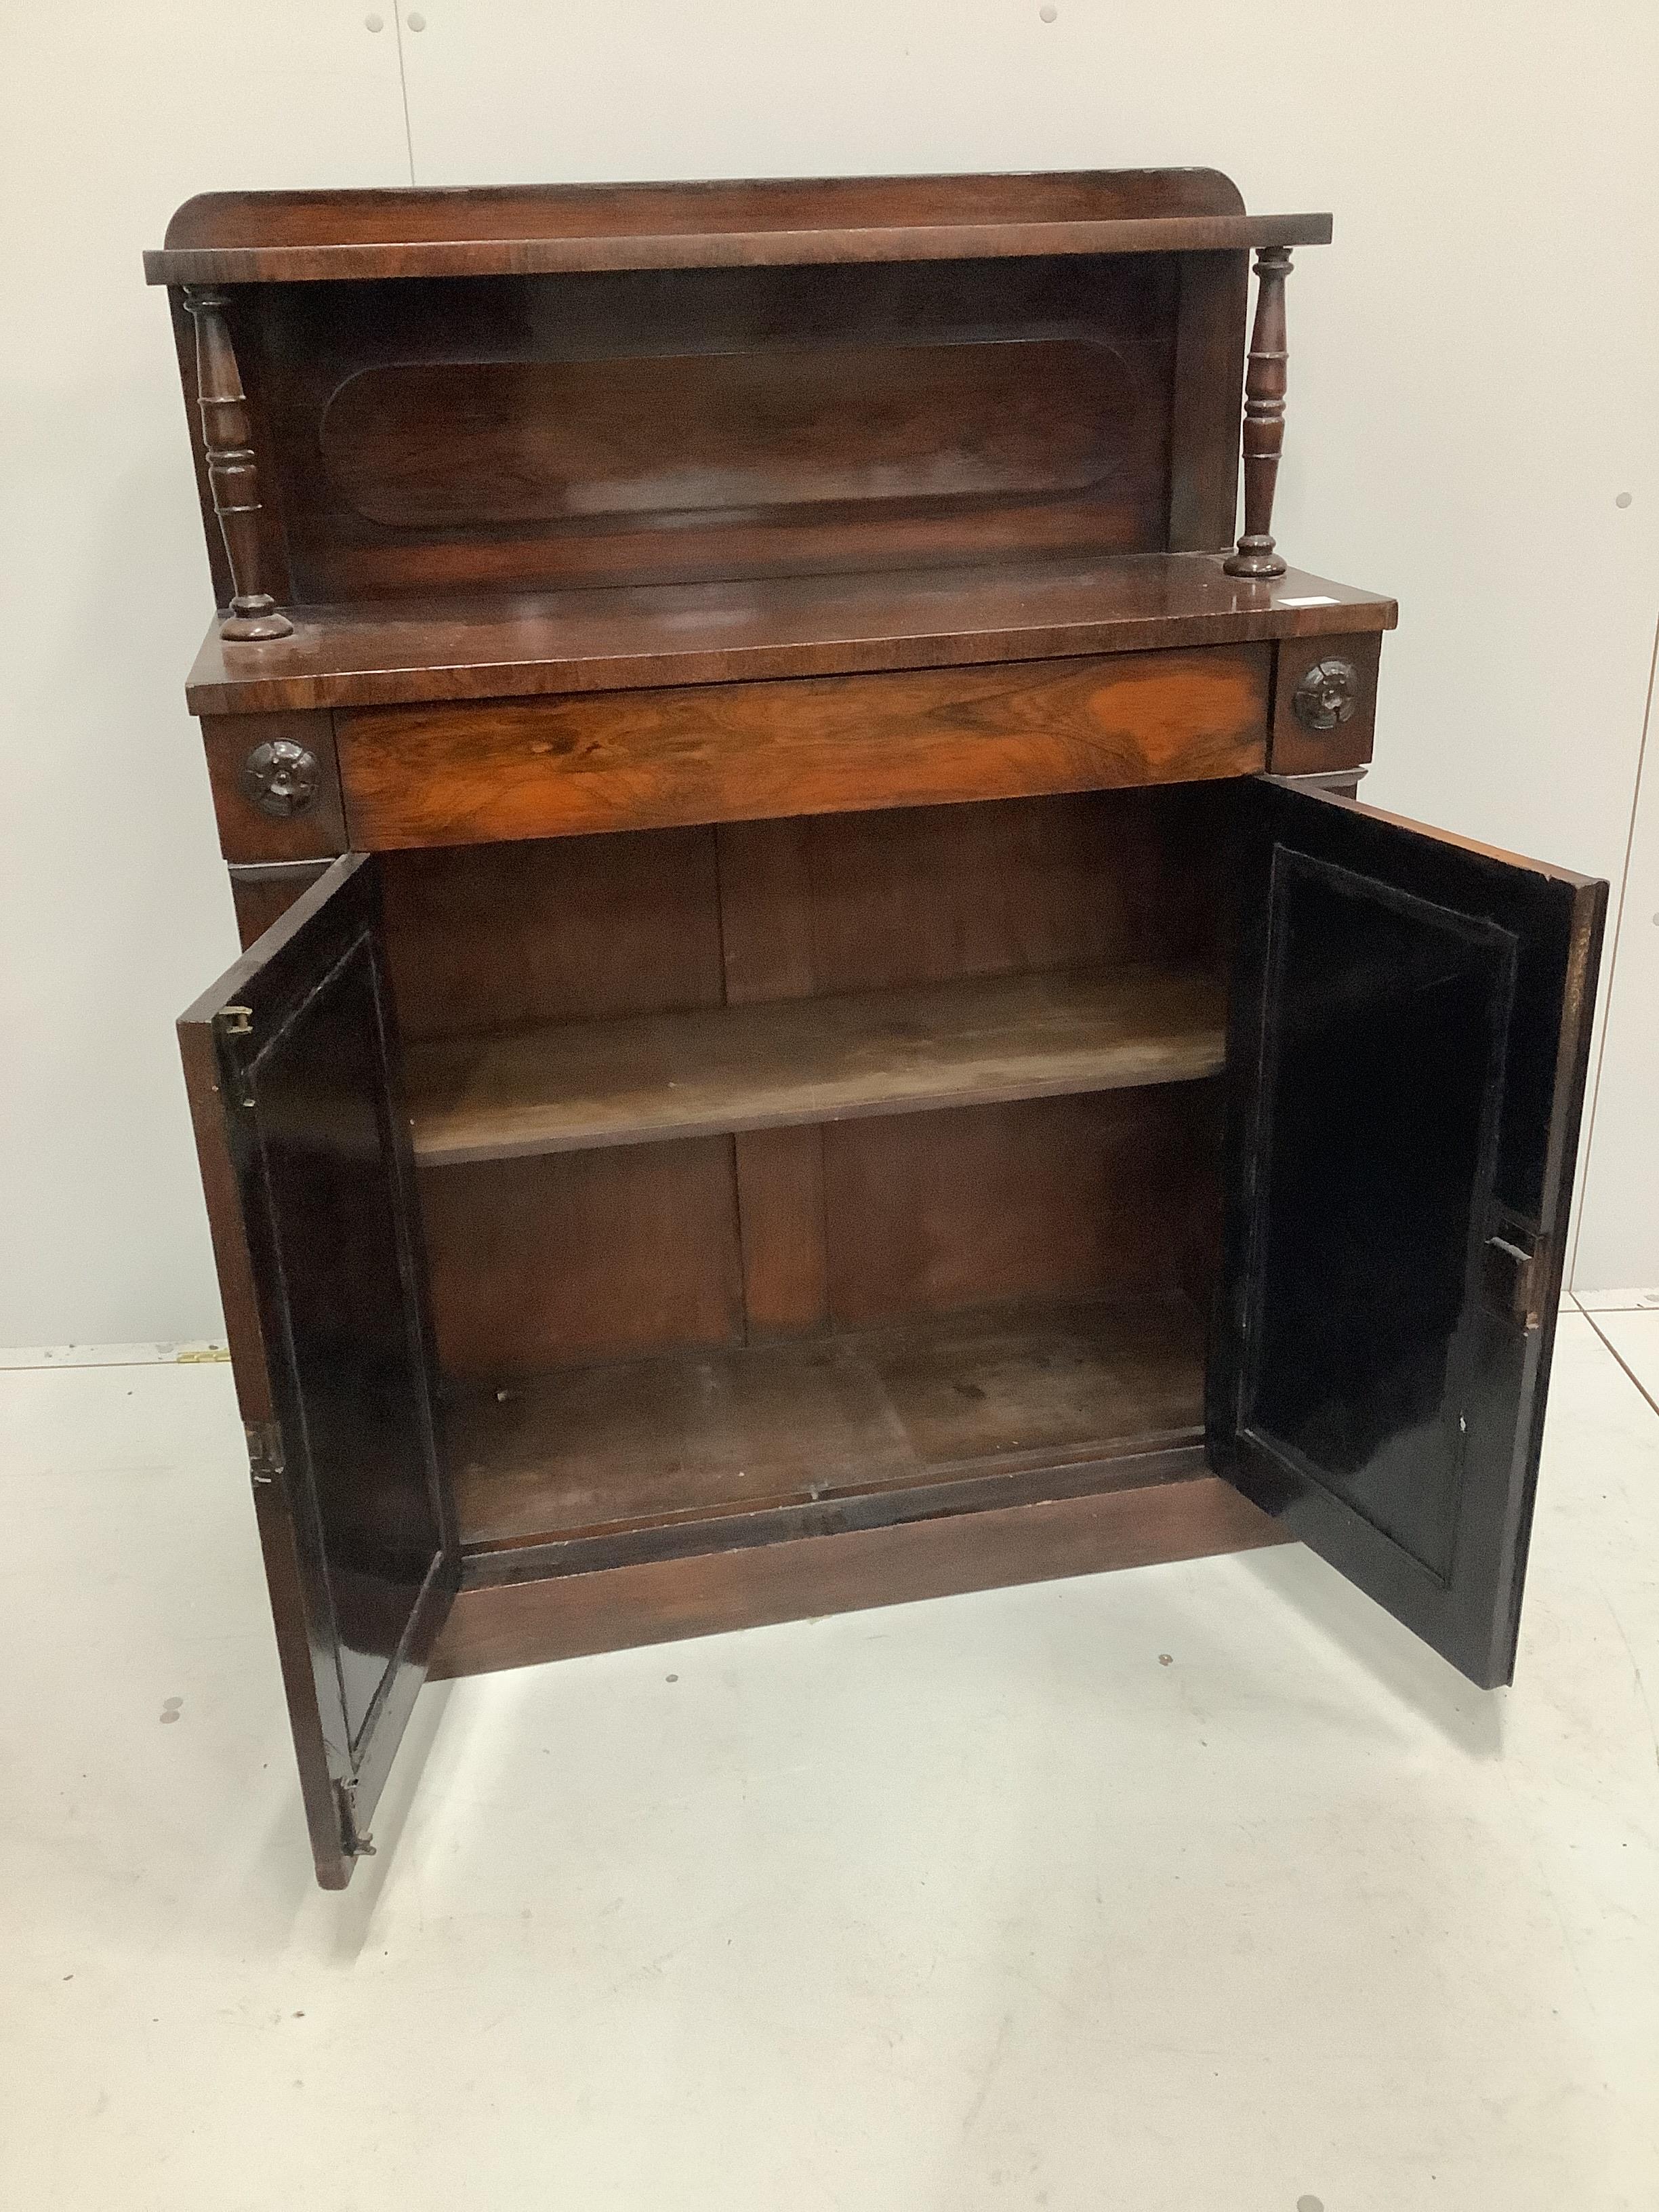 A small early Victorian rosewood chiffonier, width 92cm, depth 36cm, height 120cm